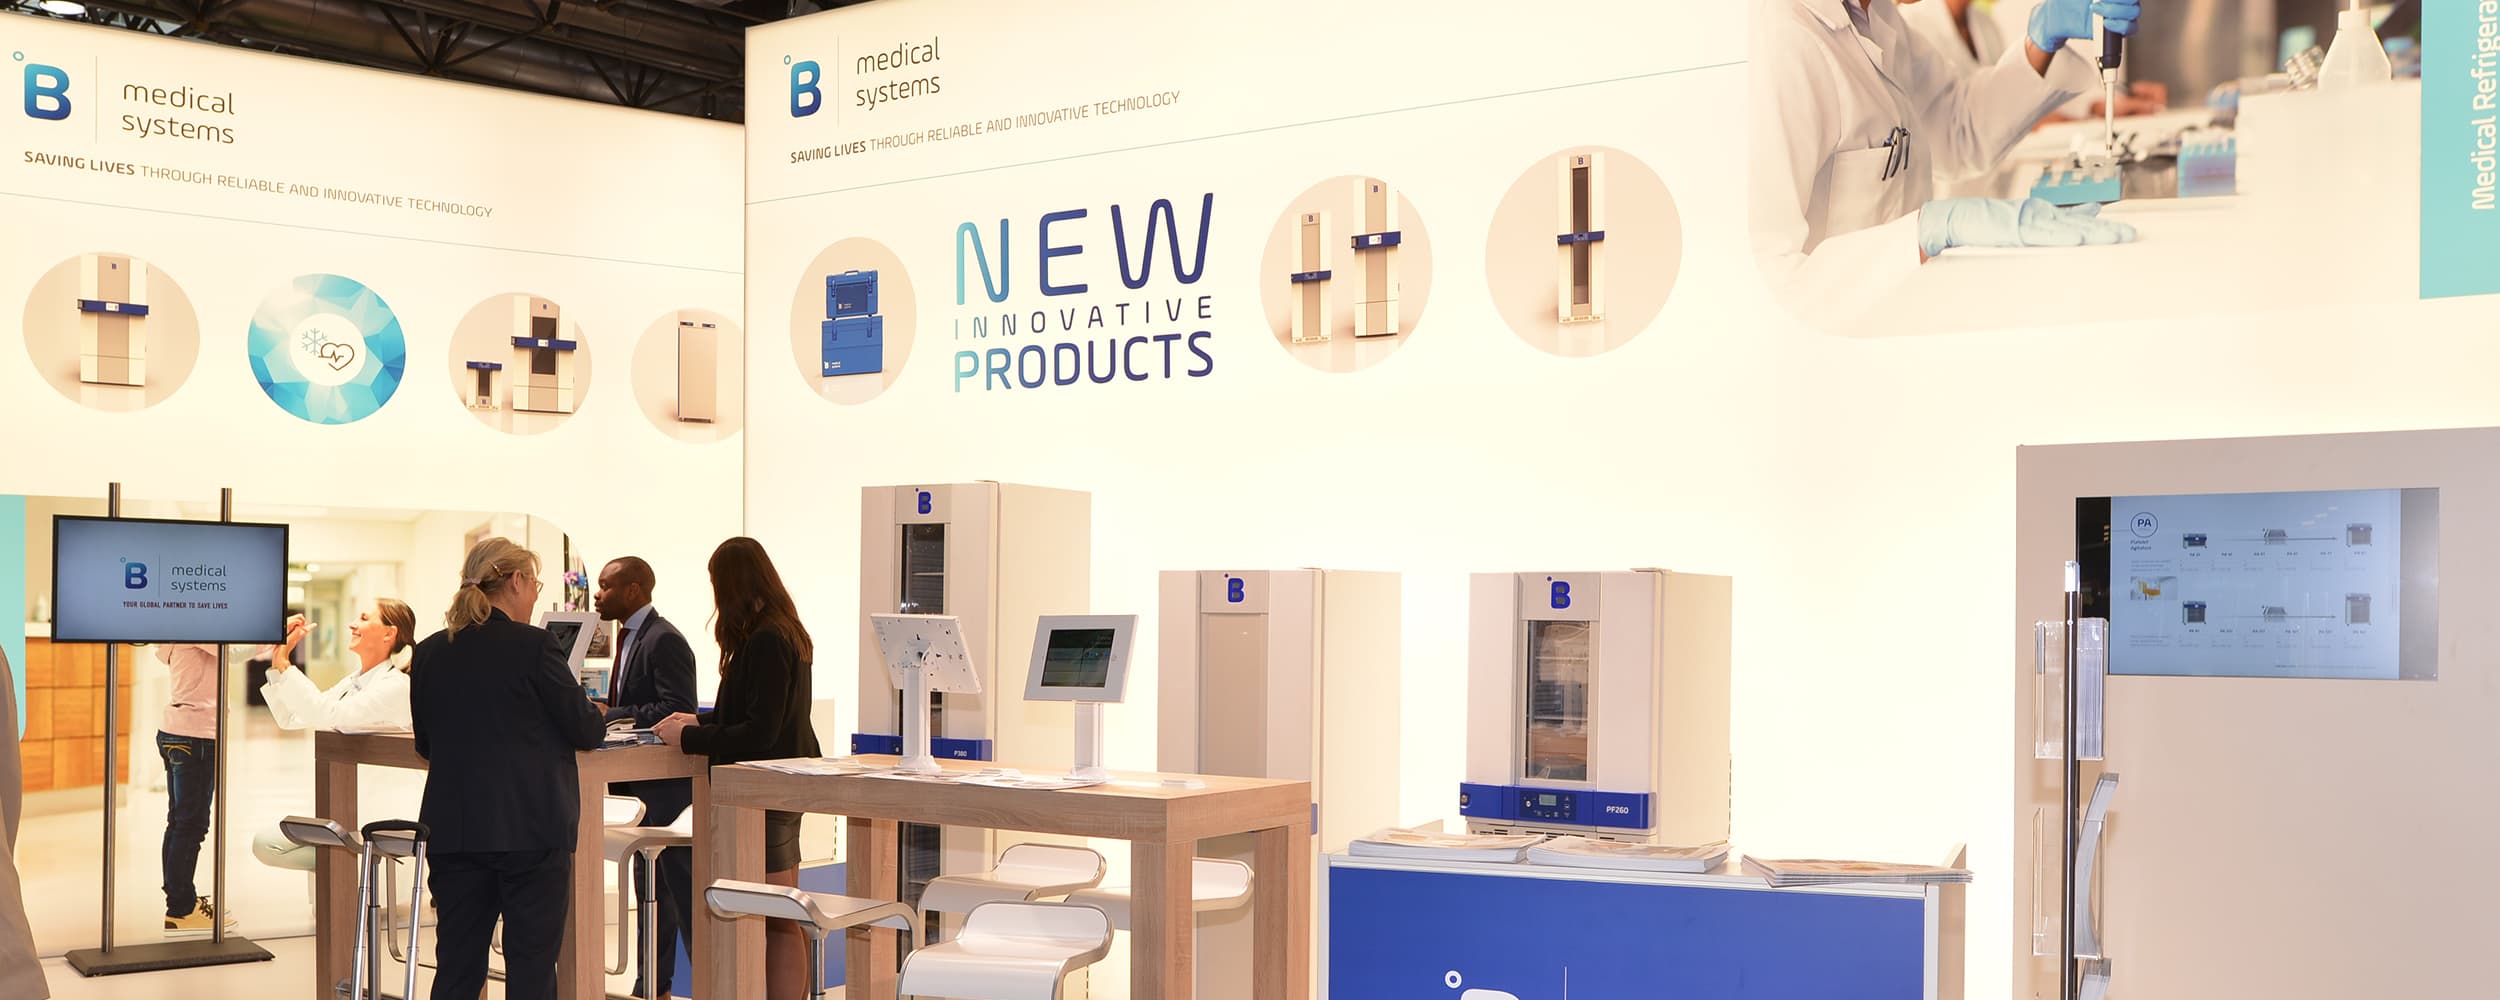 B Medical Systems booth at Analytica